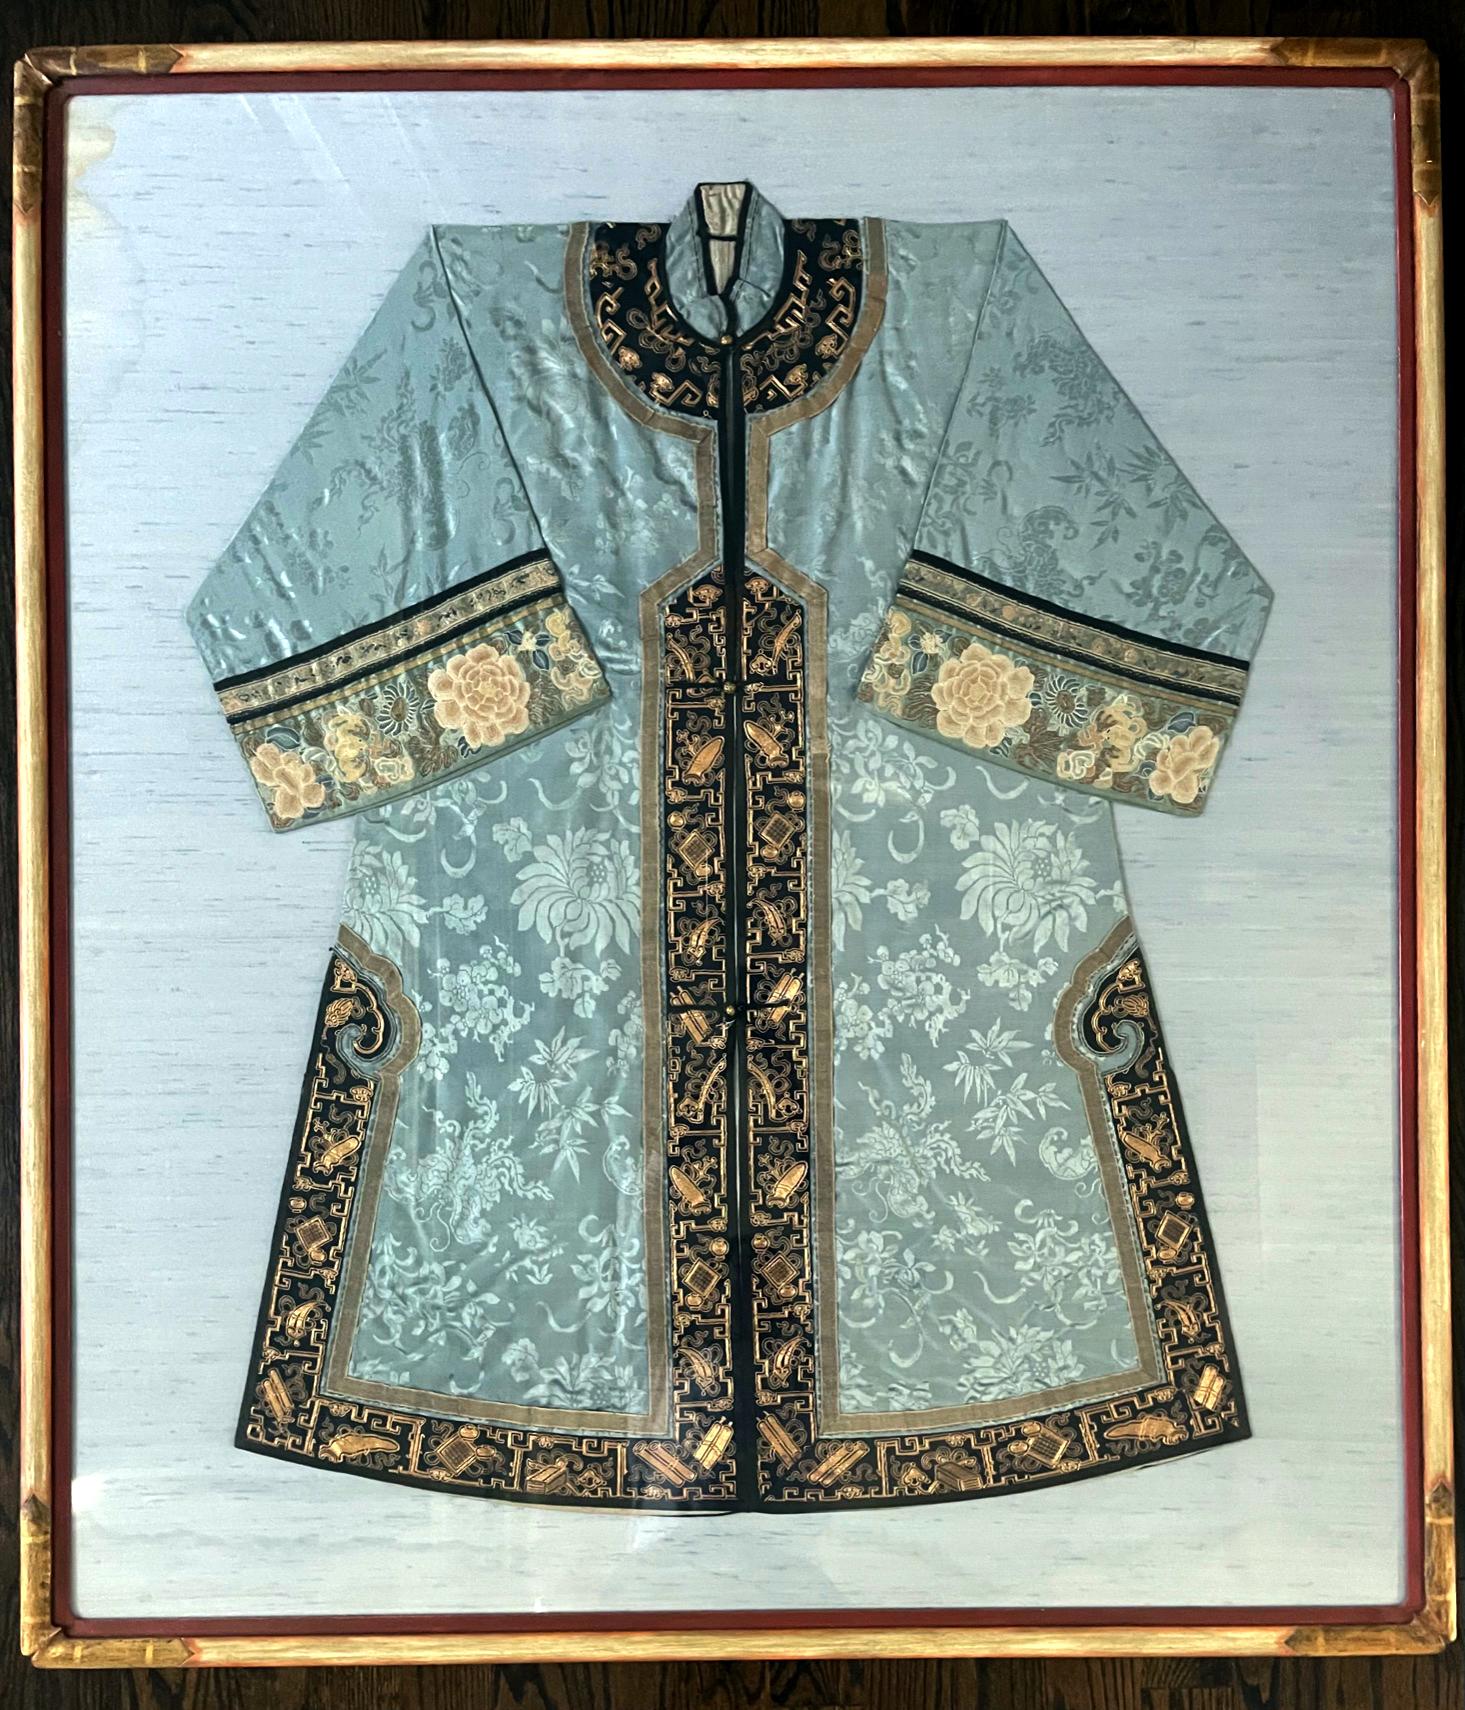 A woman's coat made of blue woven brocade with wide sleeves from China late Qing Dynasty (circa mid to late 19th century), professionally mounted and presented on blue linen board and framed as a beautiful piece of textile art. The coat features